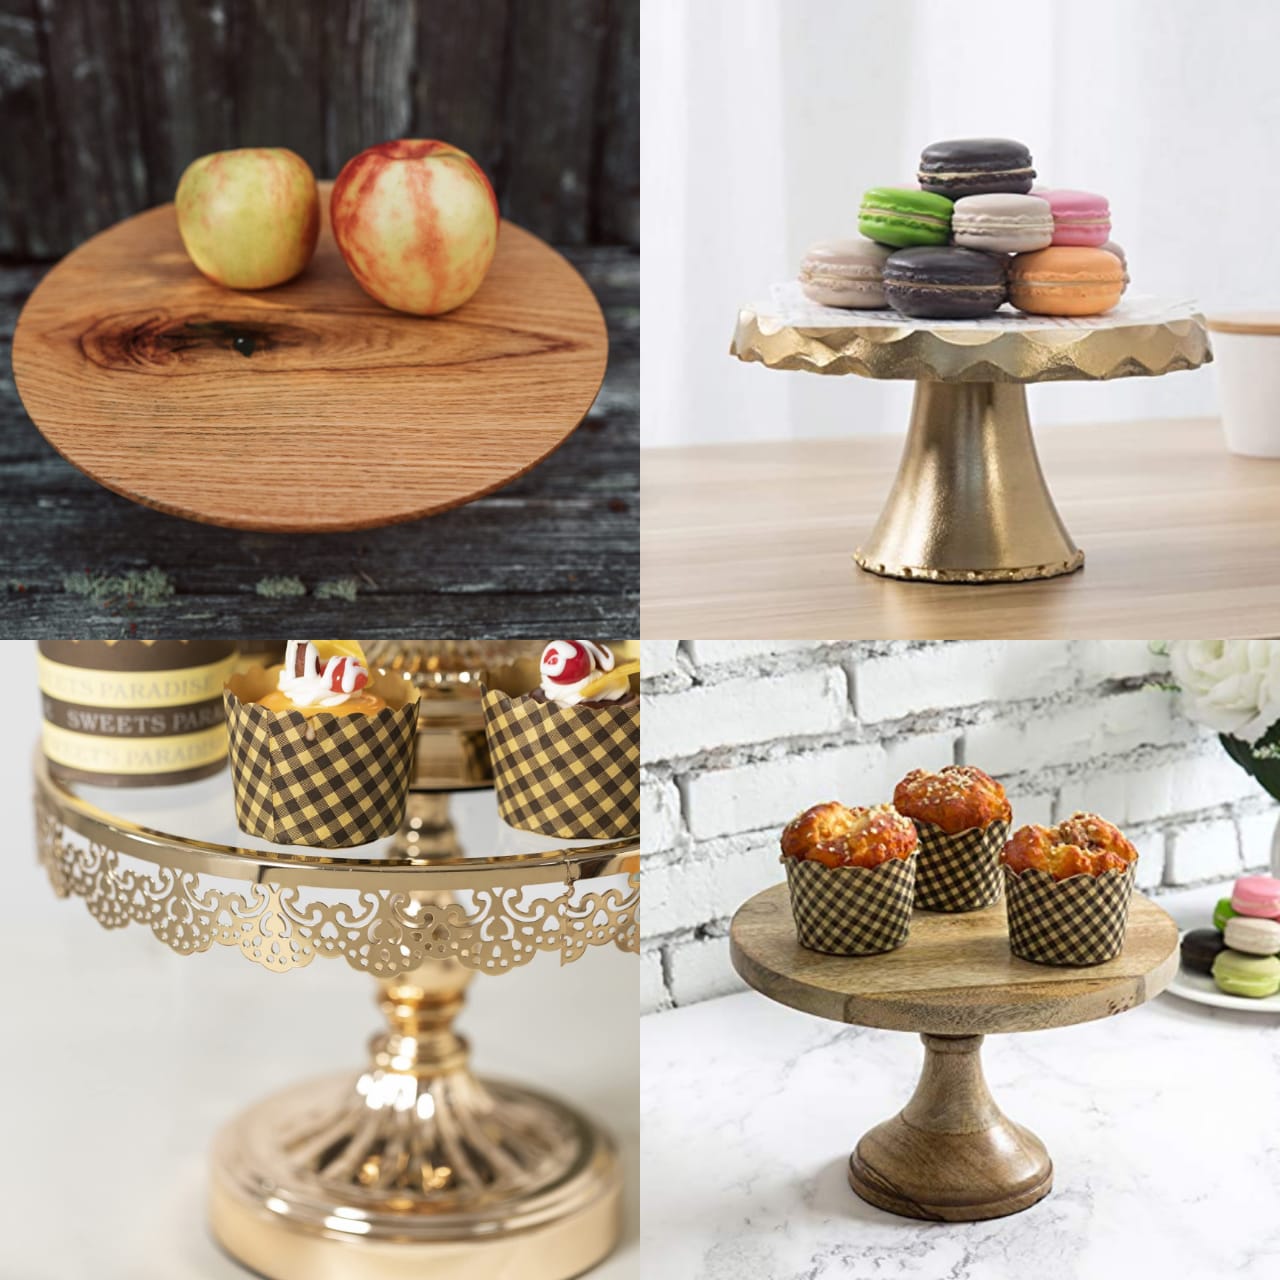 Metal and Wooden Cake stands